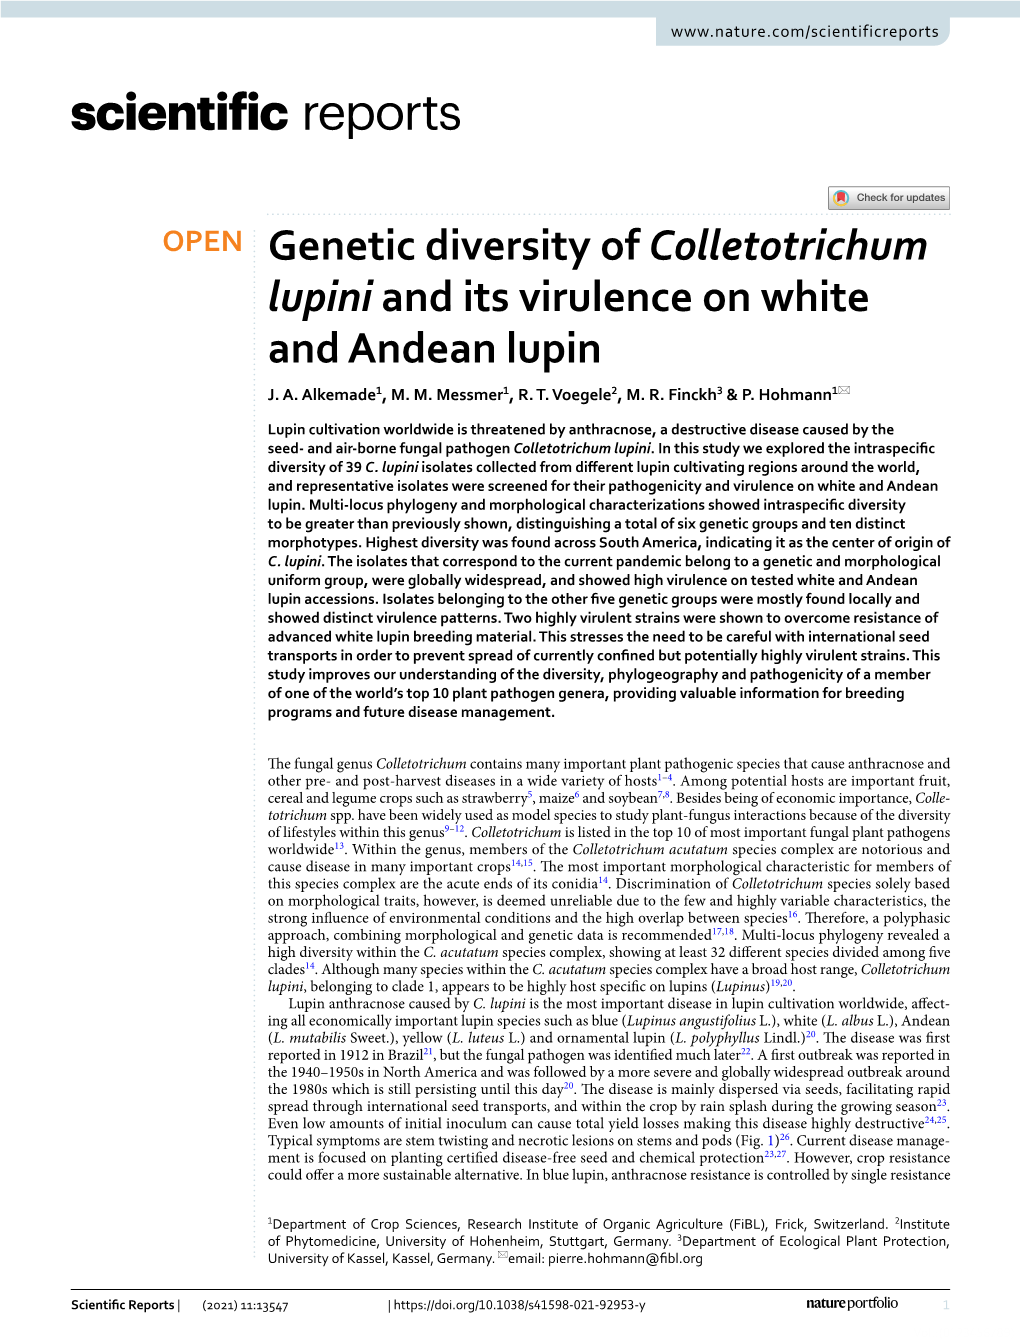 Genetic Diversity of Colletotrichum Lupini and Its Virulence on White and Andean Lupin J